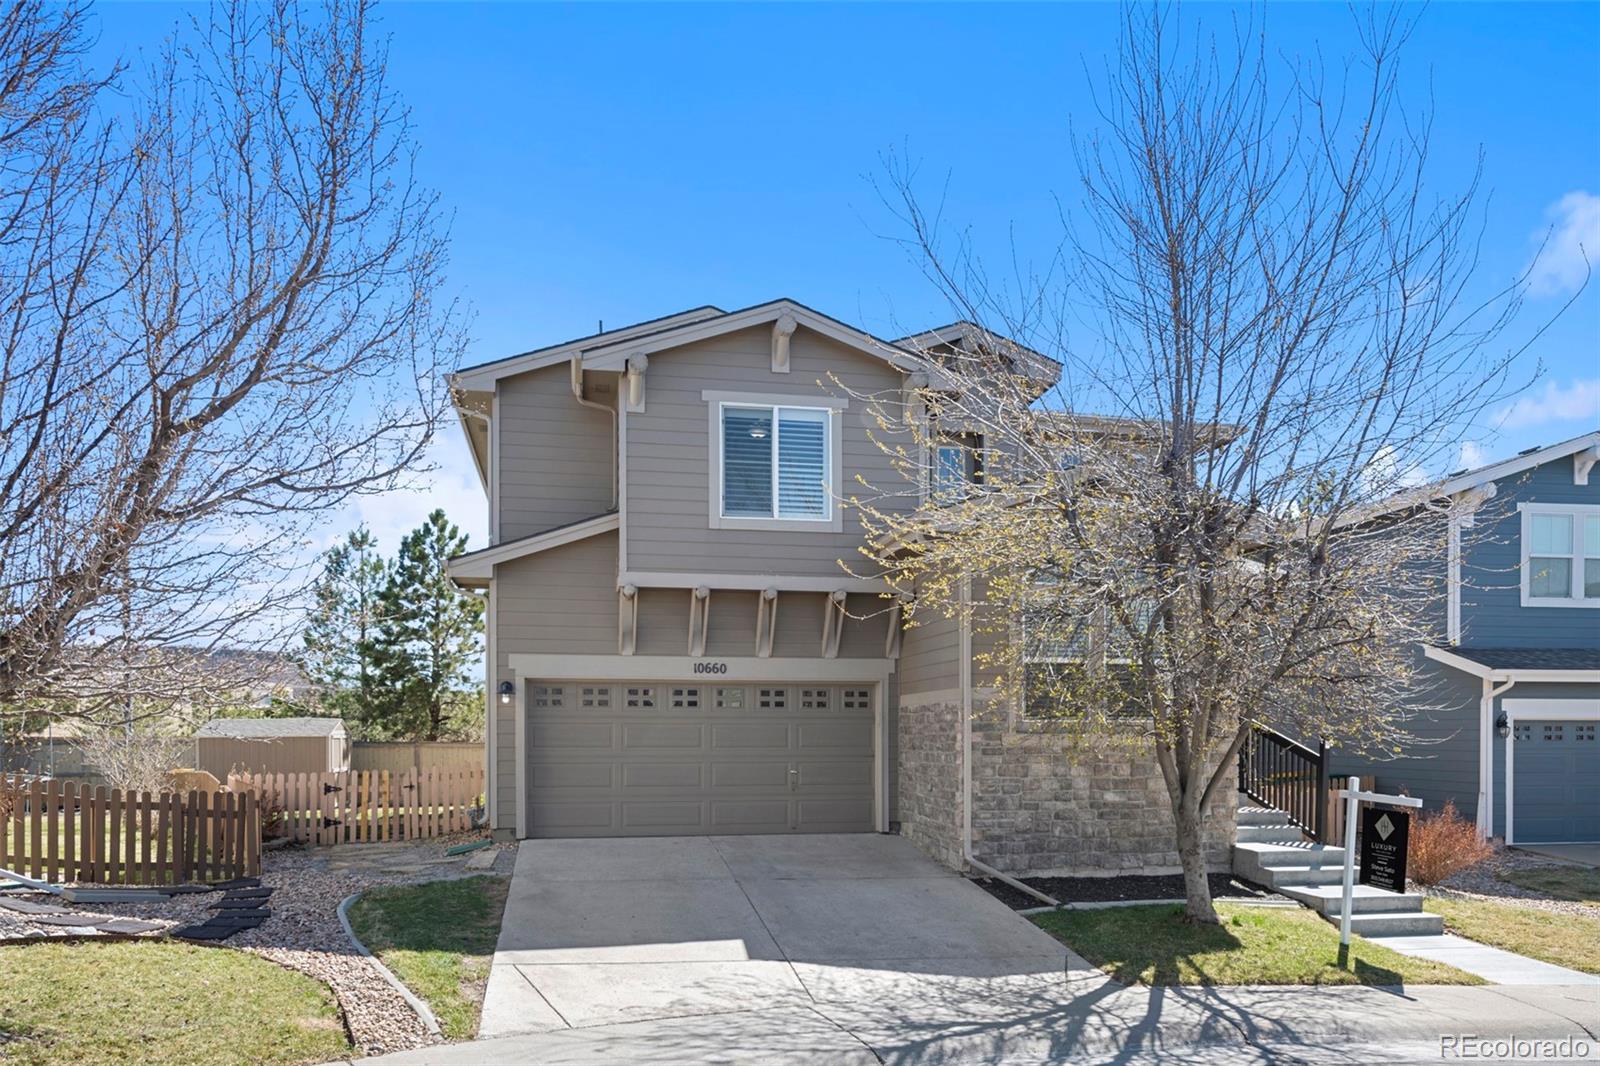 Report Image for 10660  Jewelberry Circle,Highlands Ranch, Colorado